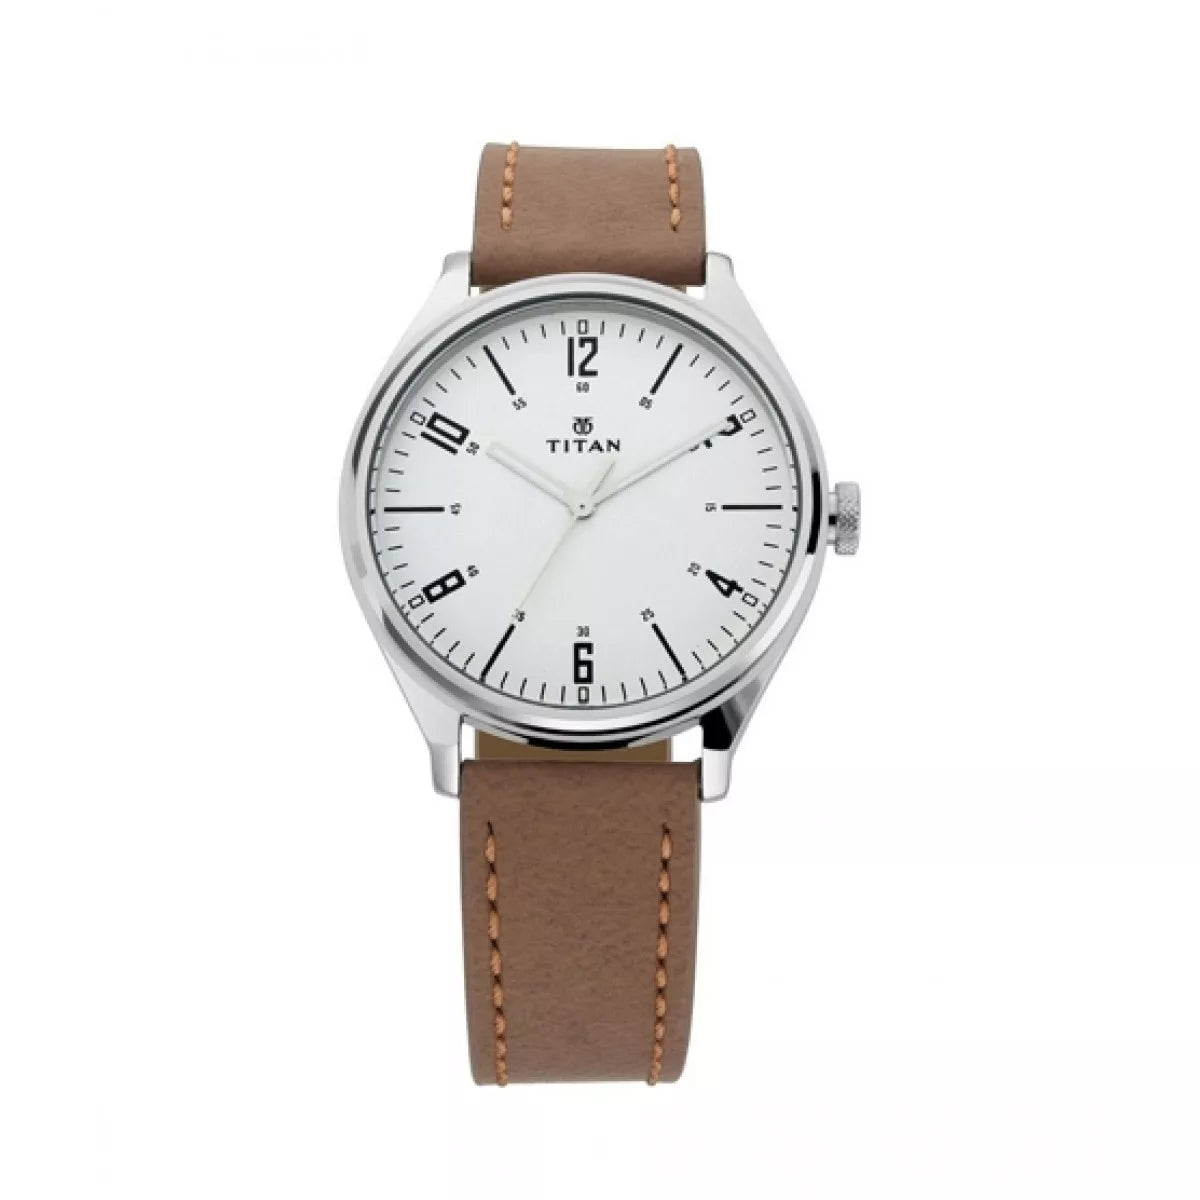 Titan Work Wear Men's Watch 1802SL01 | Leather Band | Water-Resistant | Quartz Movement | Classic Style | Fashionable | Durable | Affordable | Halabh.com